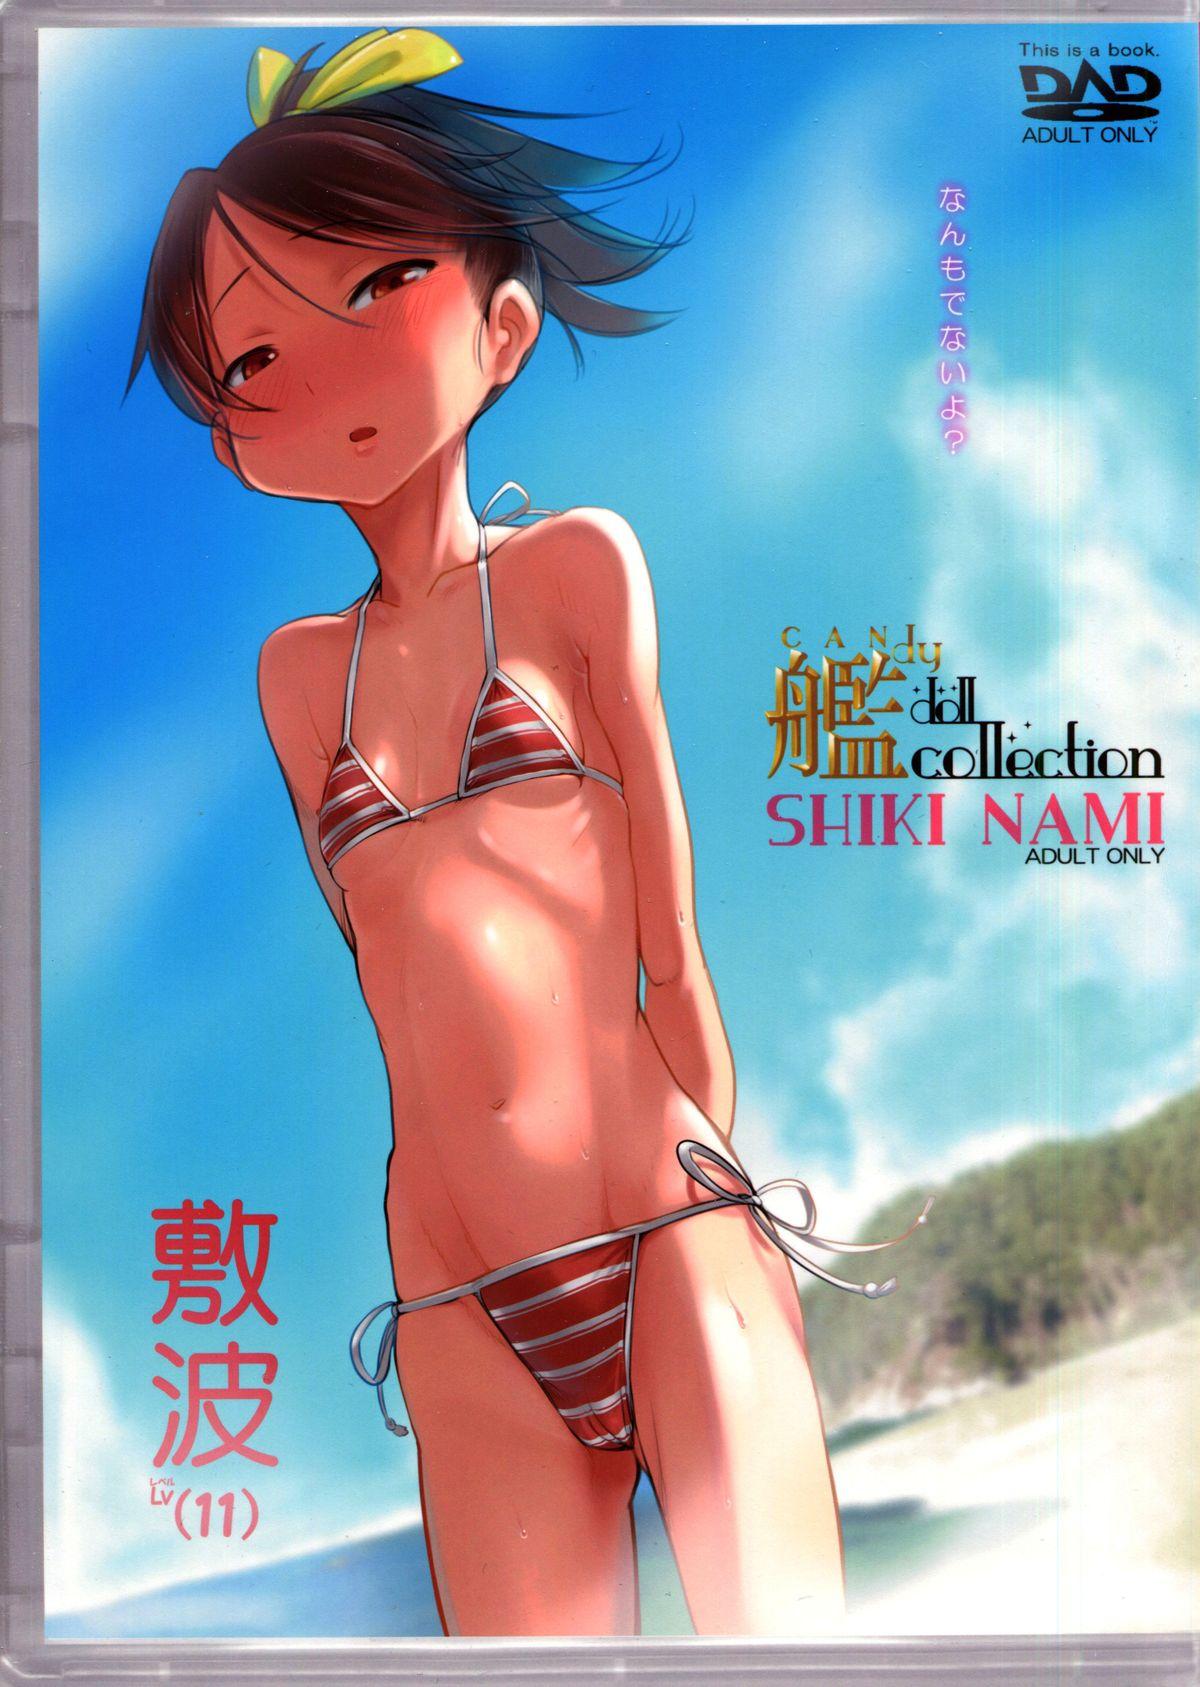 Infiel Kandy doll collection Shikinami - Kantai collection Stretch - Page 1